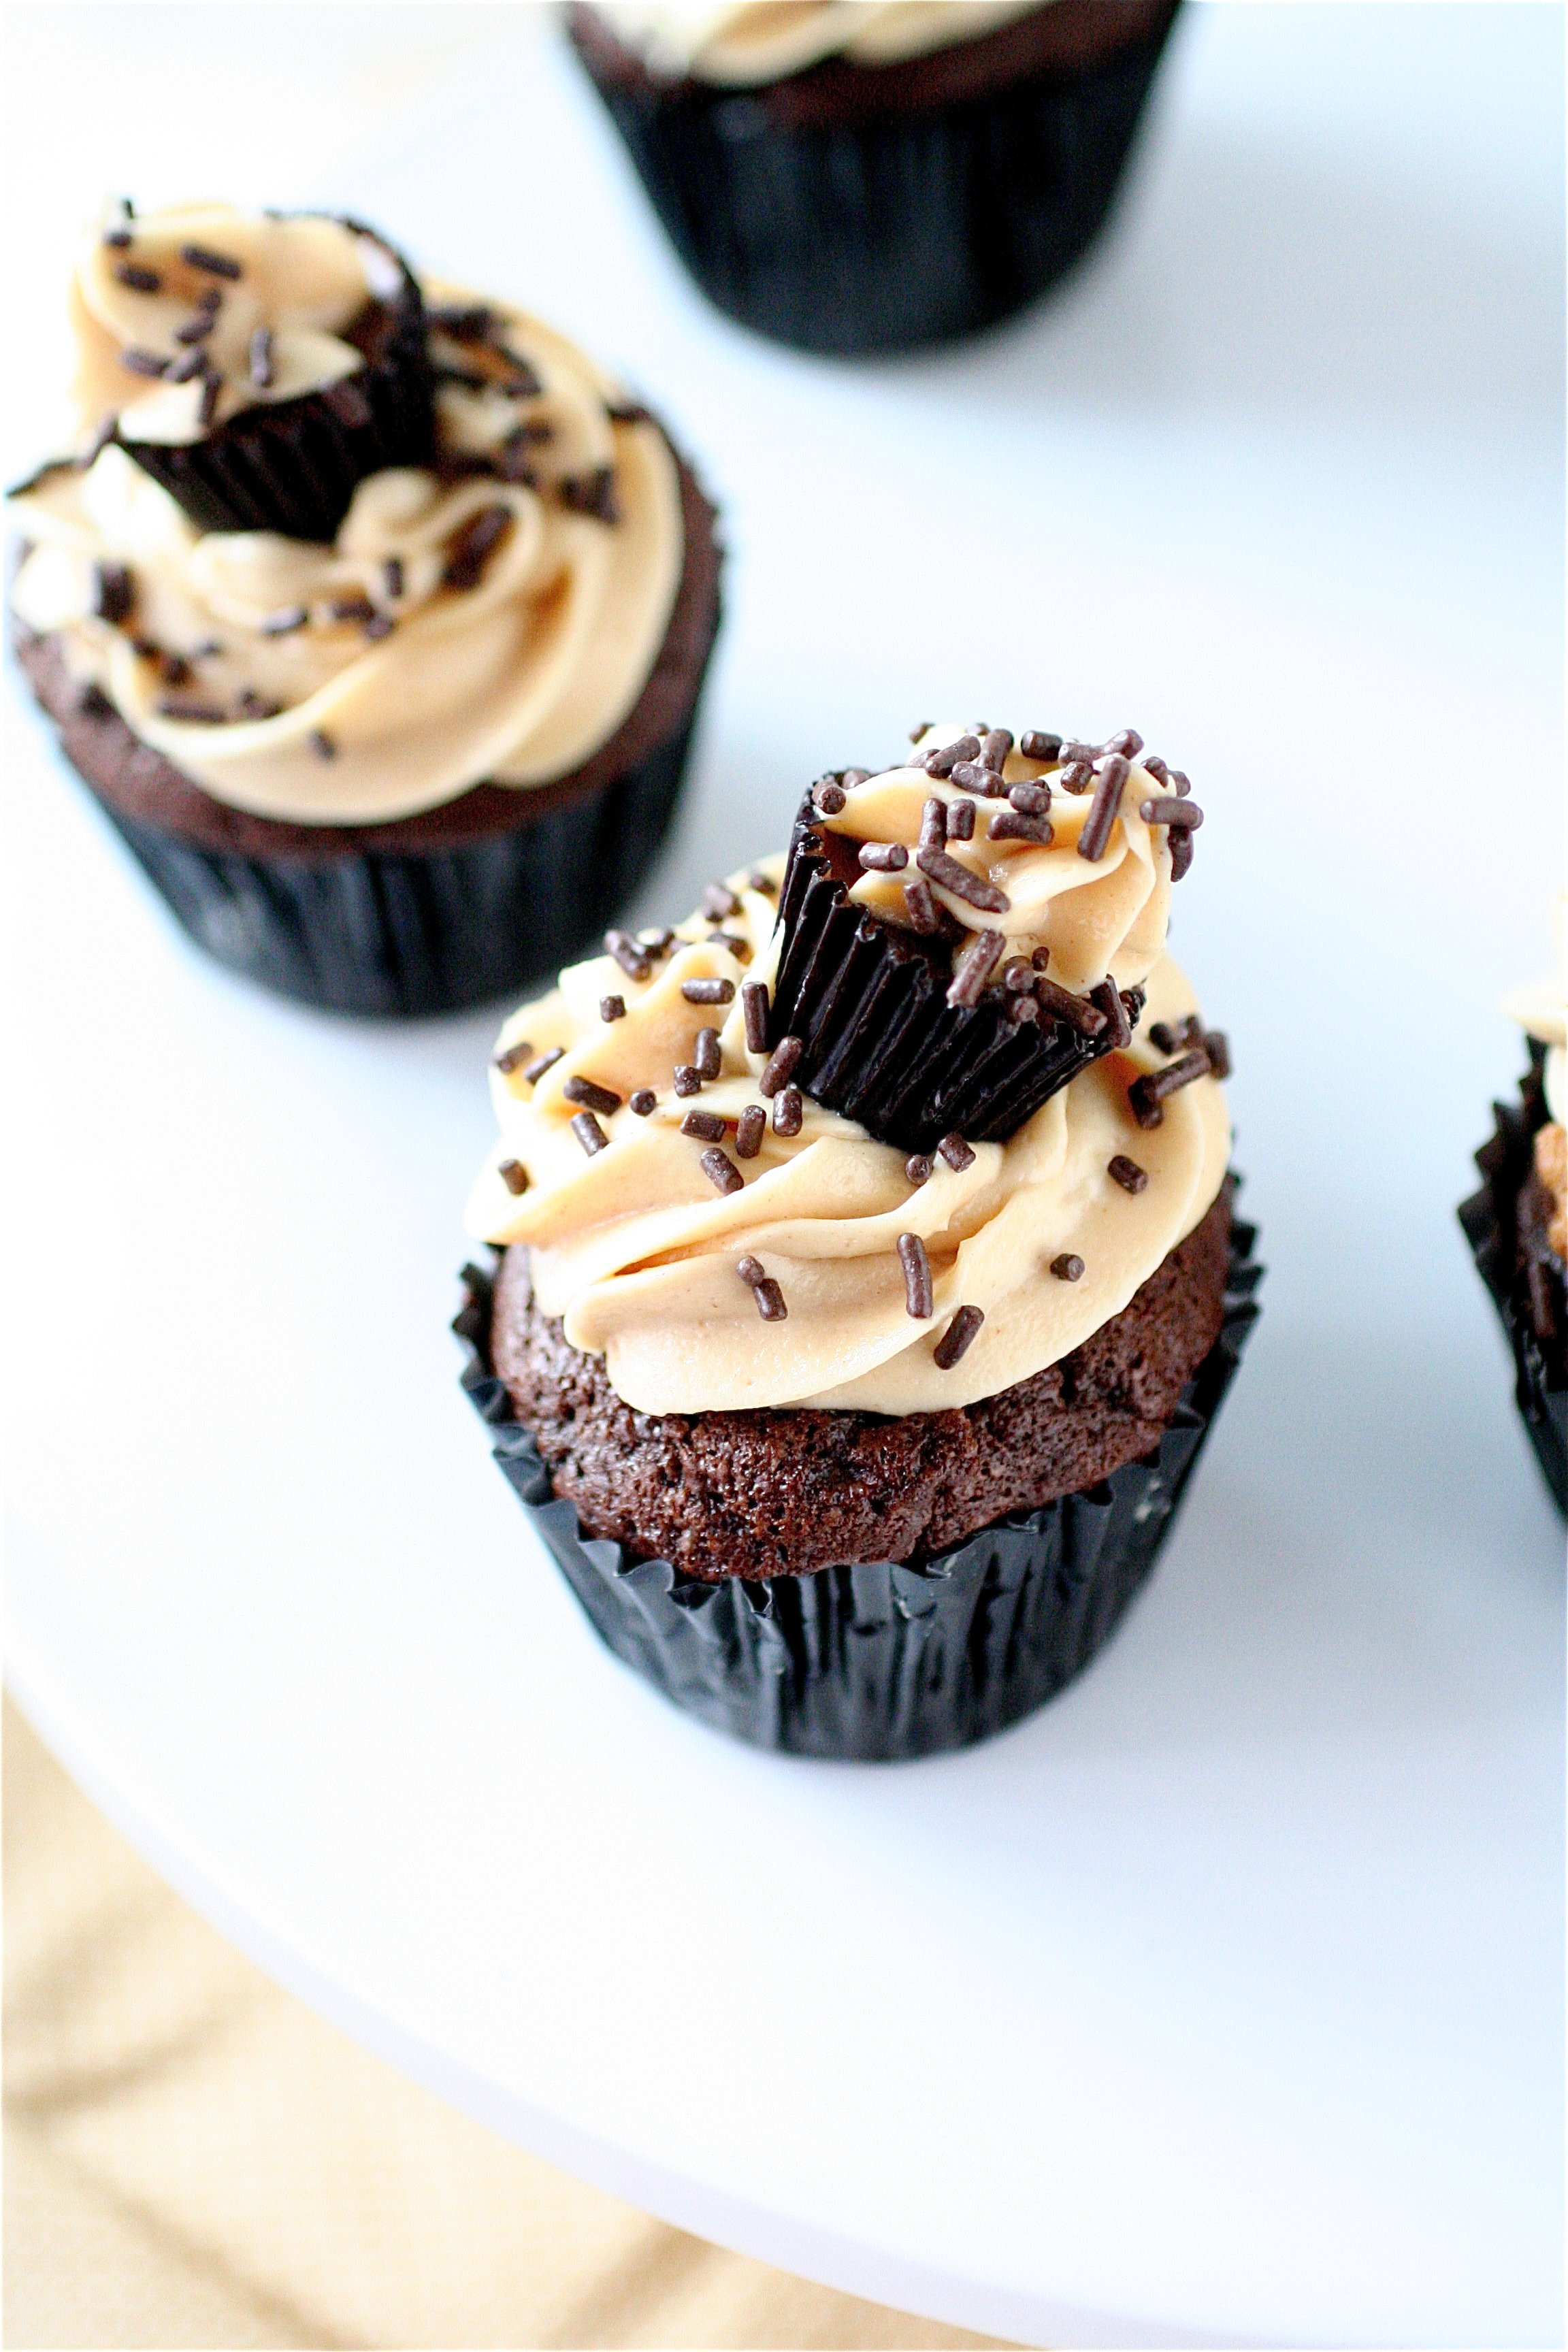 Peanut Butter Cup Cupcakes | The Curvy Carrot